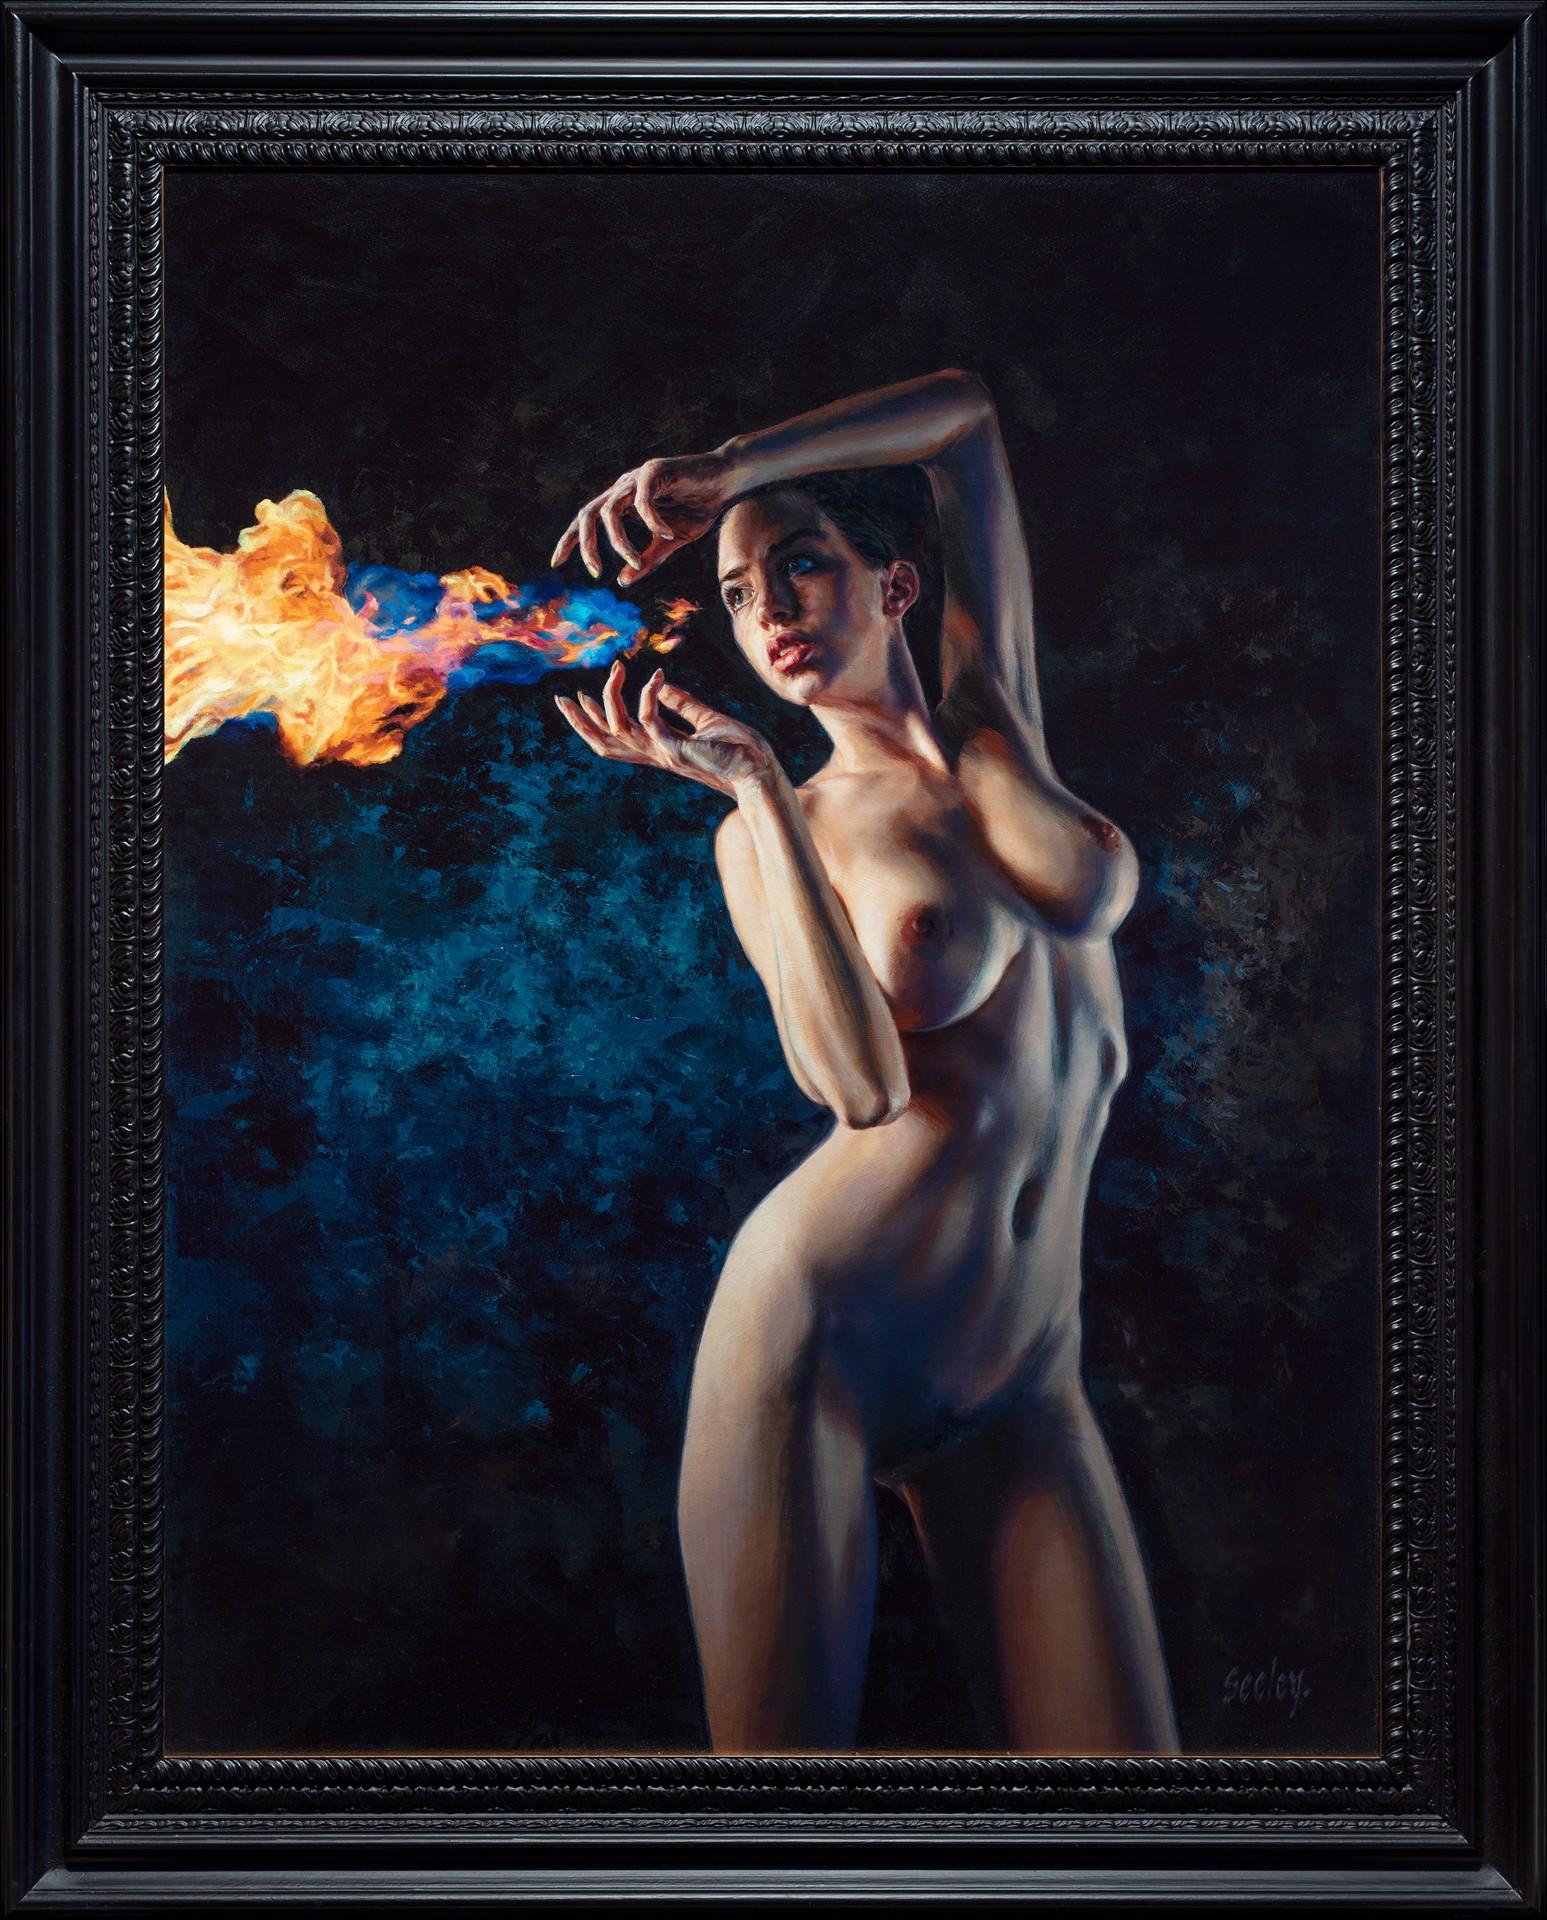 Elemental Fire Starter  Oil Painting - Black Portrait Painting by Dave Seeley